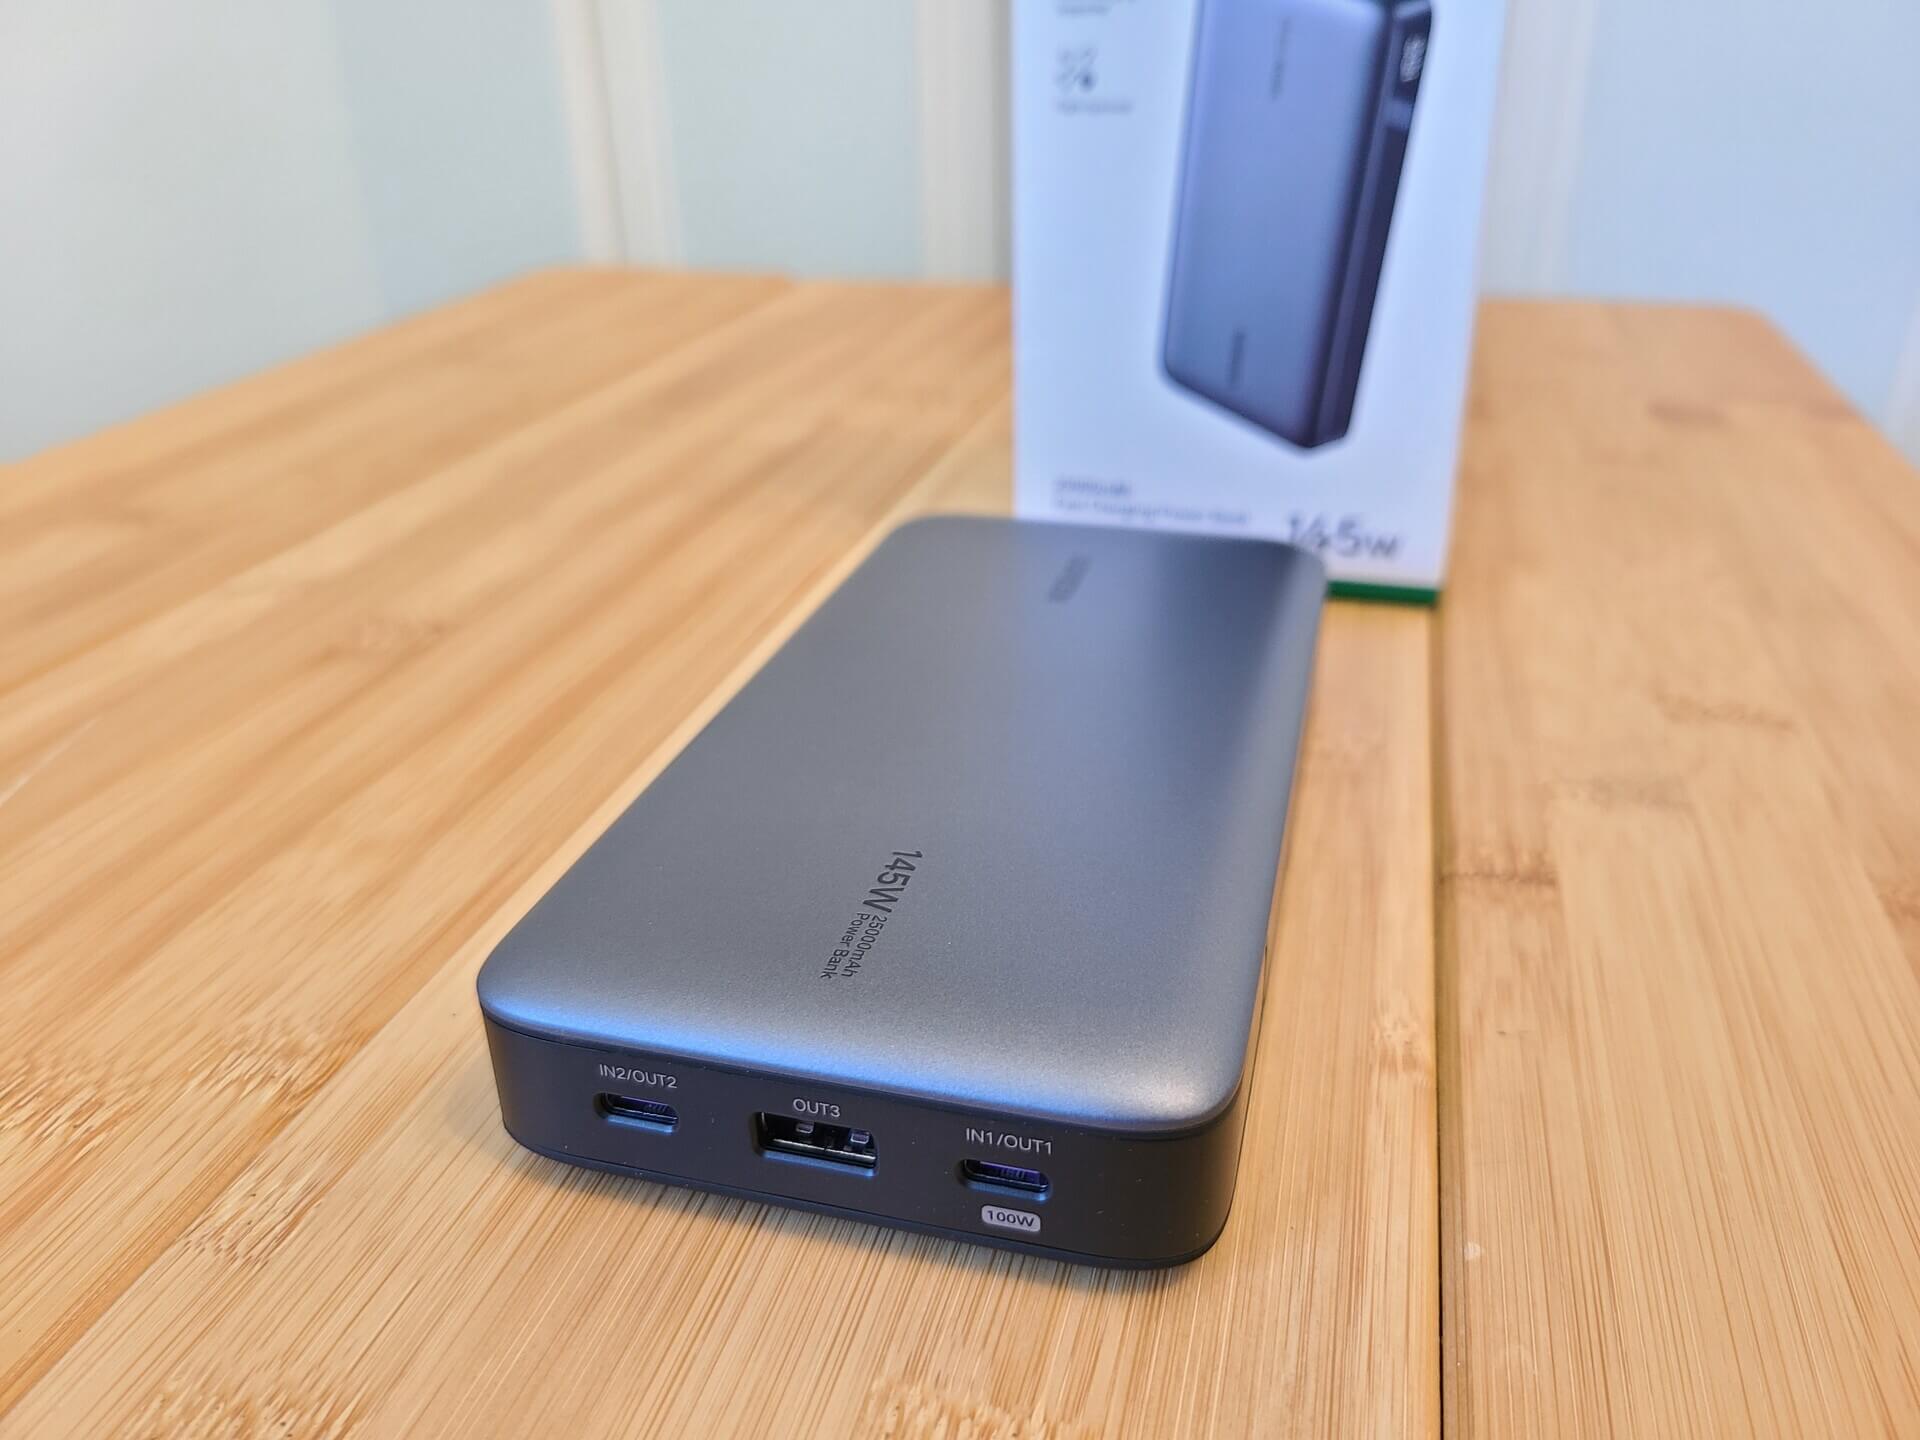 Ugreen's potent new power bank charges 3 gadgets on the go